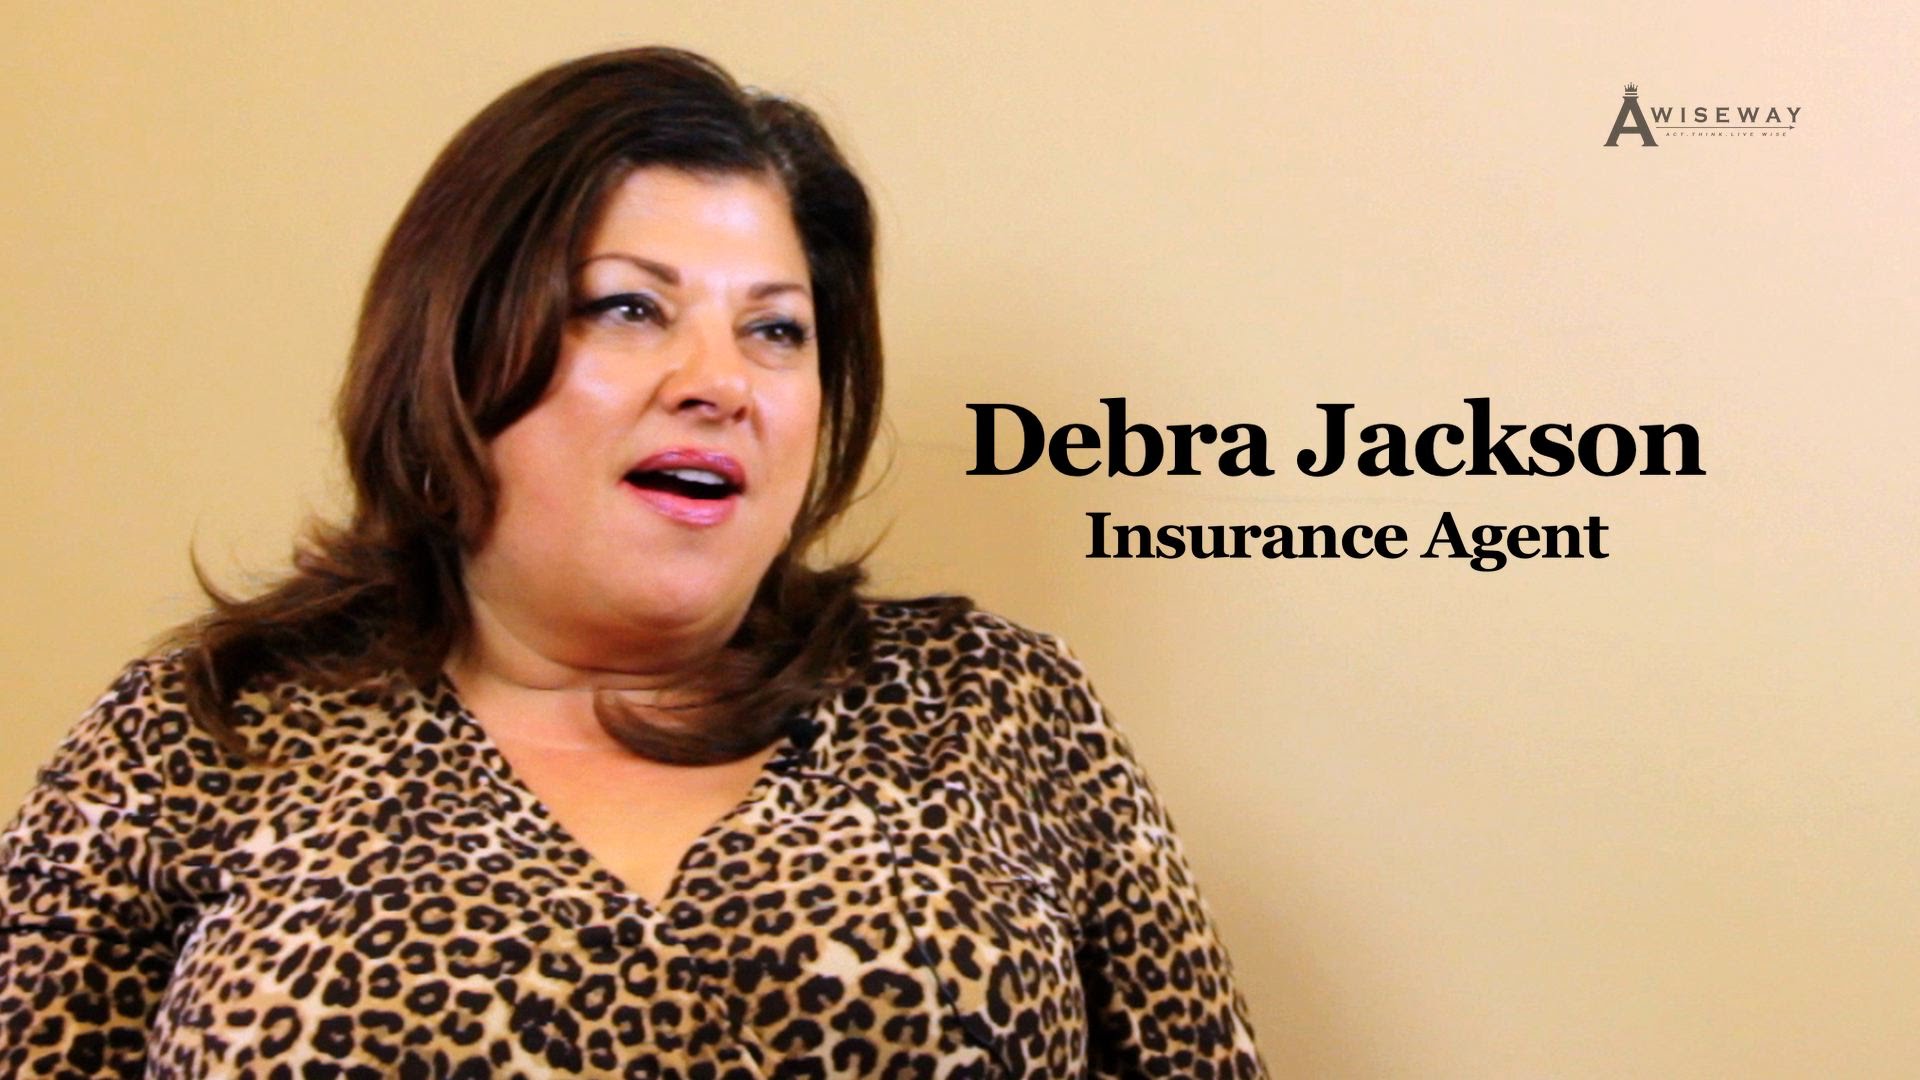 Why an agent refers to insurance as the “necessary evil”